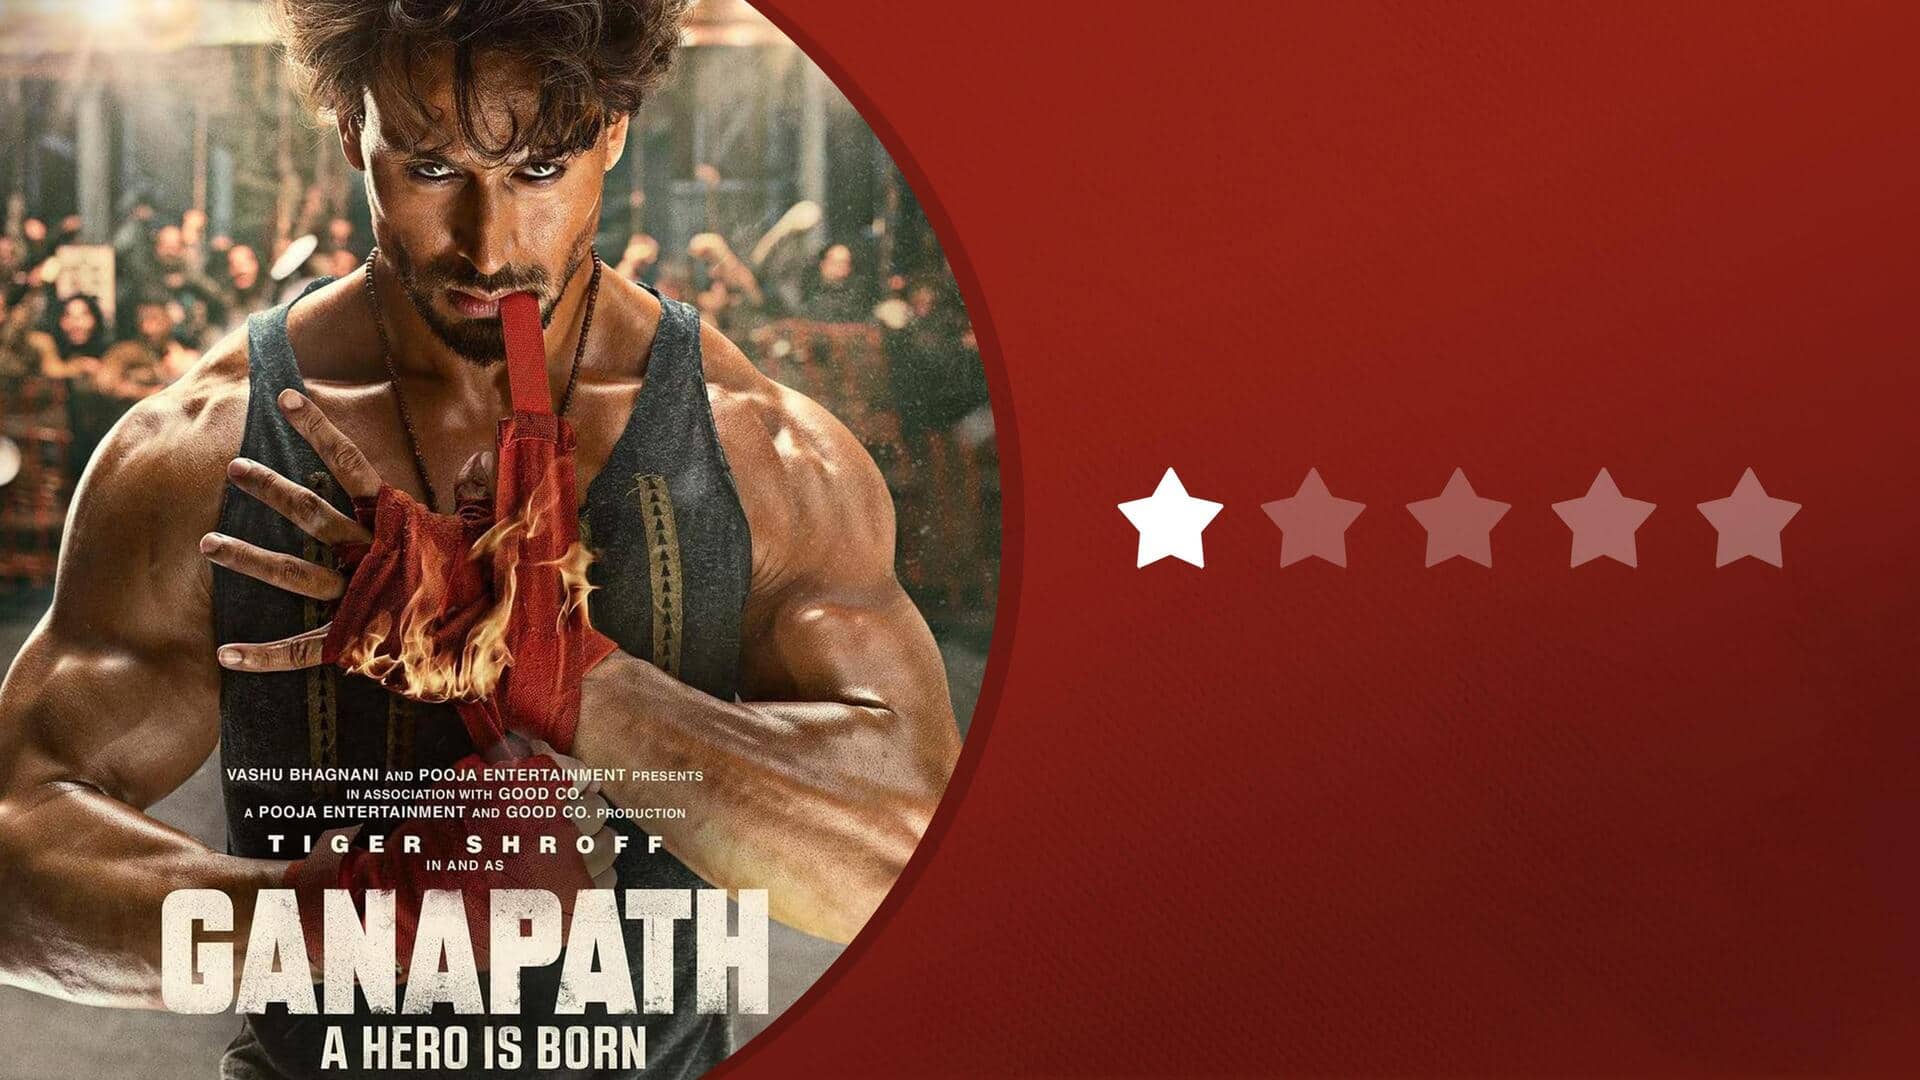 'Ganapath' review: Tiger Shroff starrer is atrocious, headache-inducing, utterly meaningless